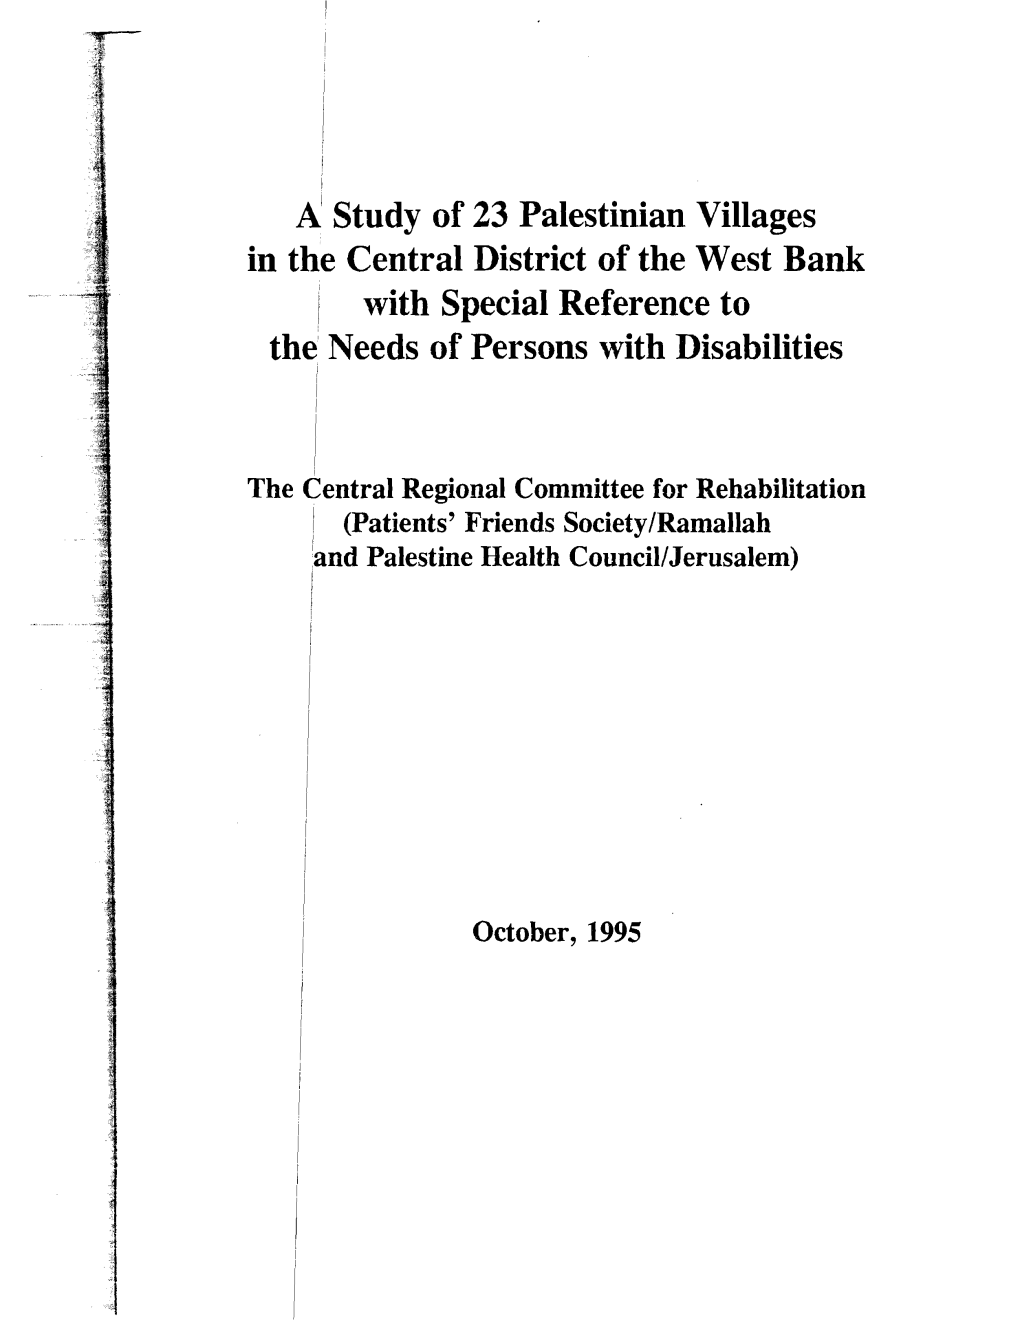 A Study of 23 Palestinian Villages in the Central District of the West Bank with Special Reference to The: Needs of Persons with Disabilities I I